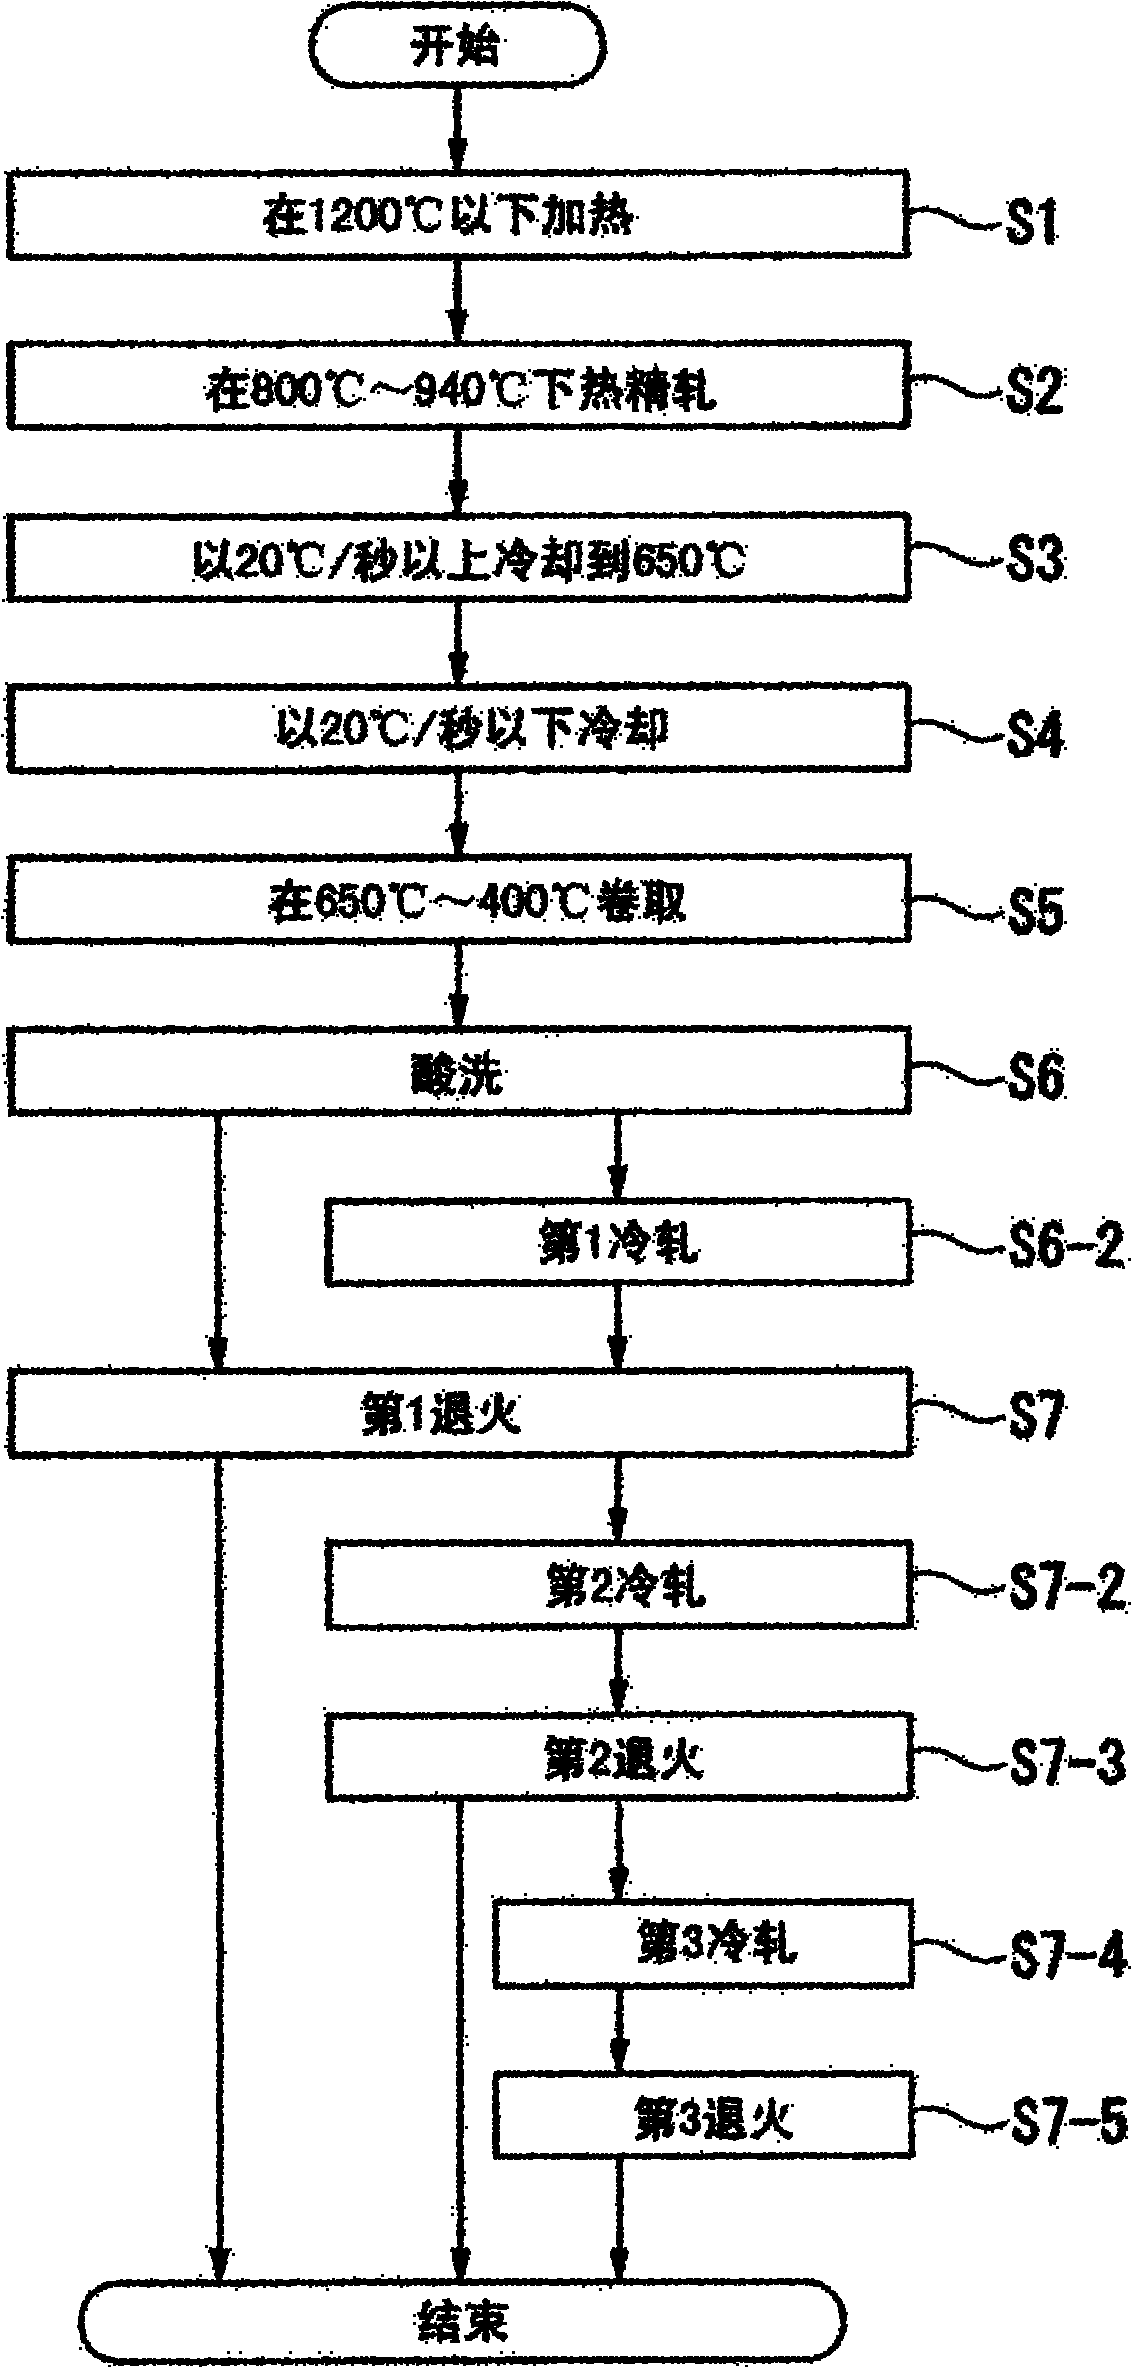 Carbon steel sheet having excellent carburization properties, and method for producing same